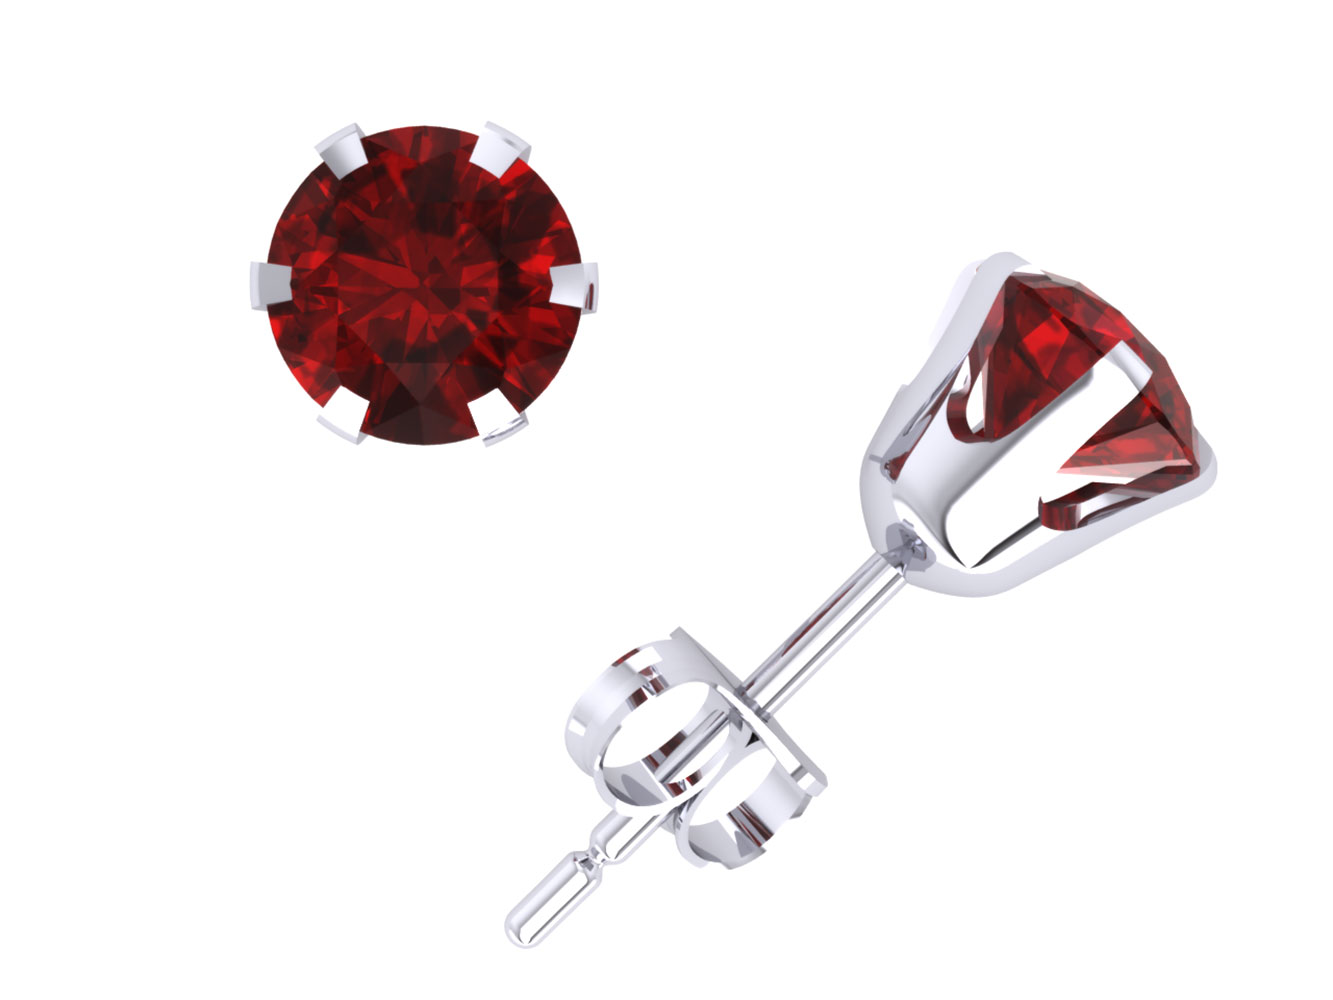 Jewel We Sell Genuine 1.25Carat Round Ruby Stud Earrings 14k White or Yellow Gold 6Prong Push Back AA Quality